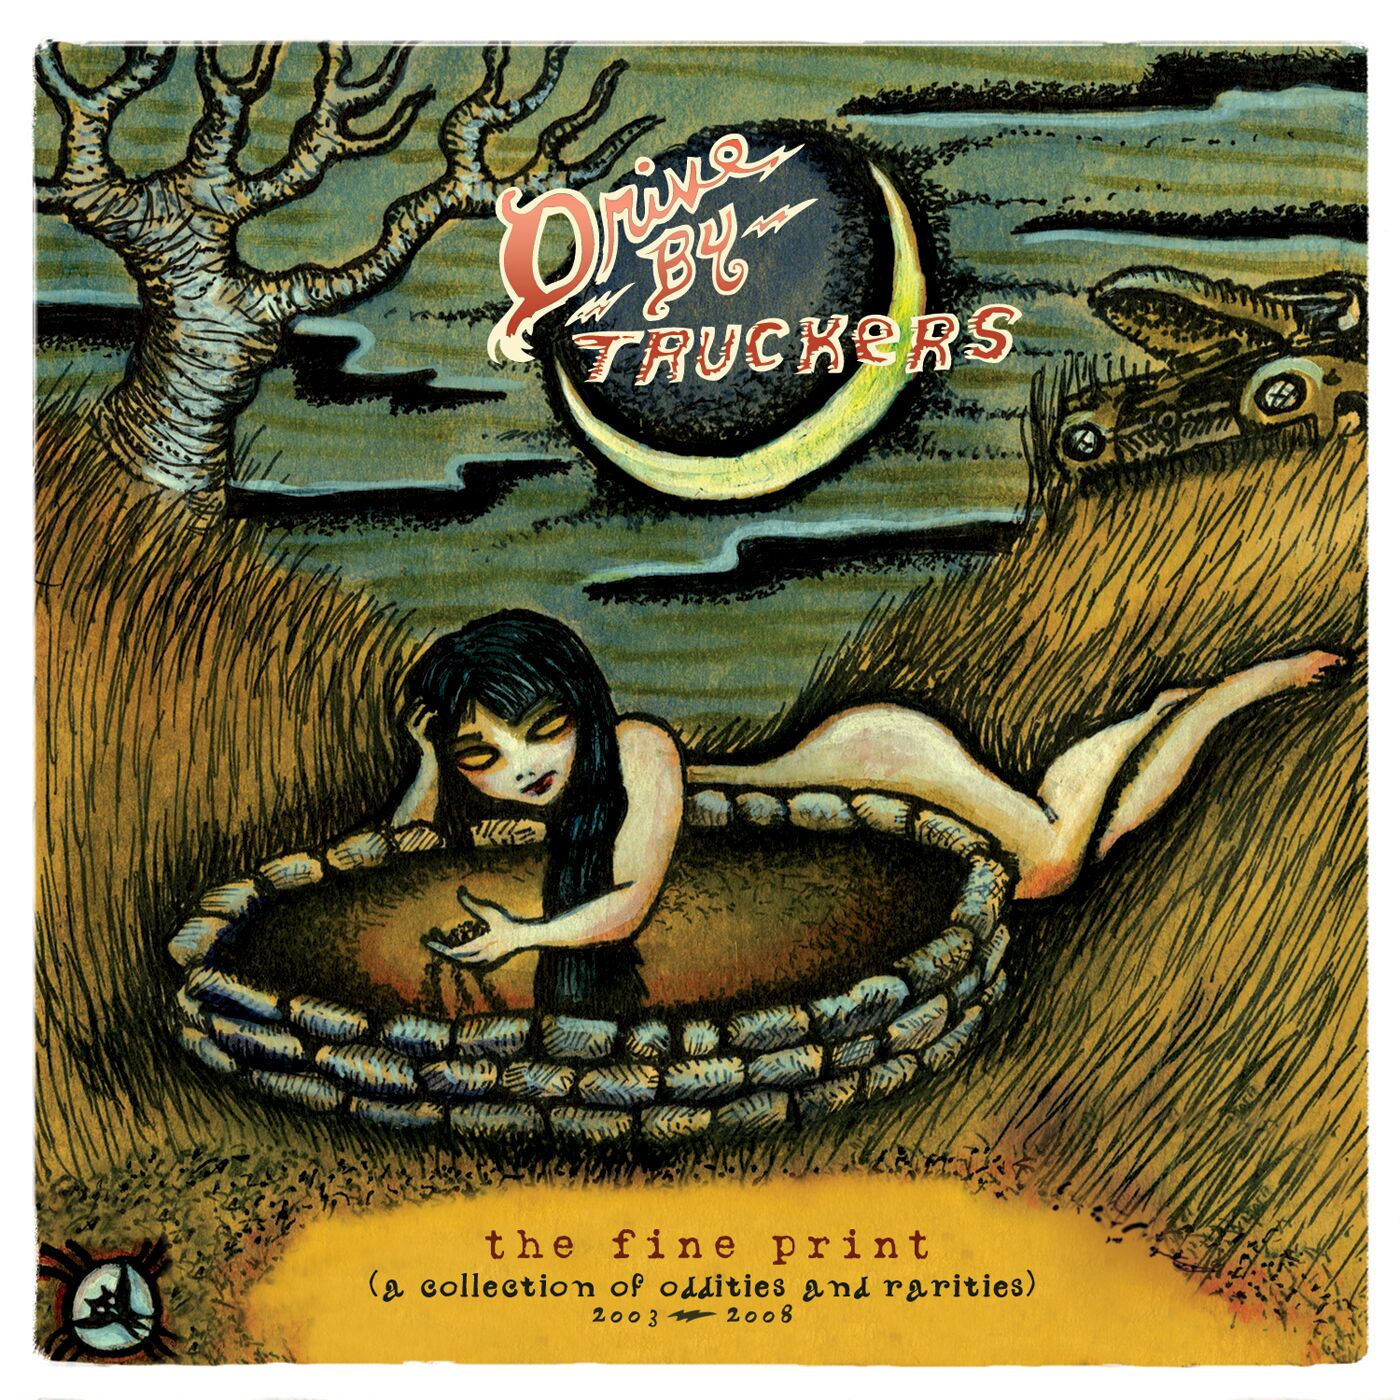 Drive-By Truckers - The Fine Print (A Collection Of Oddities And Rarities 2003-2008) [Vinyl]